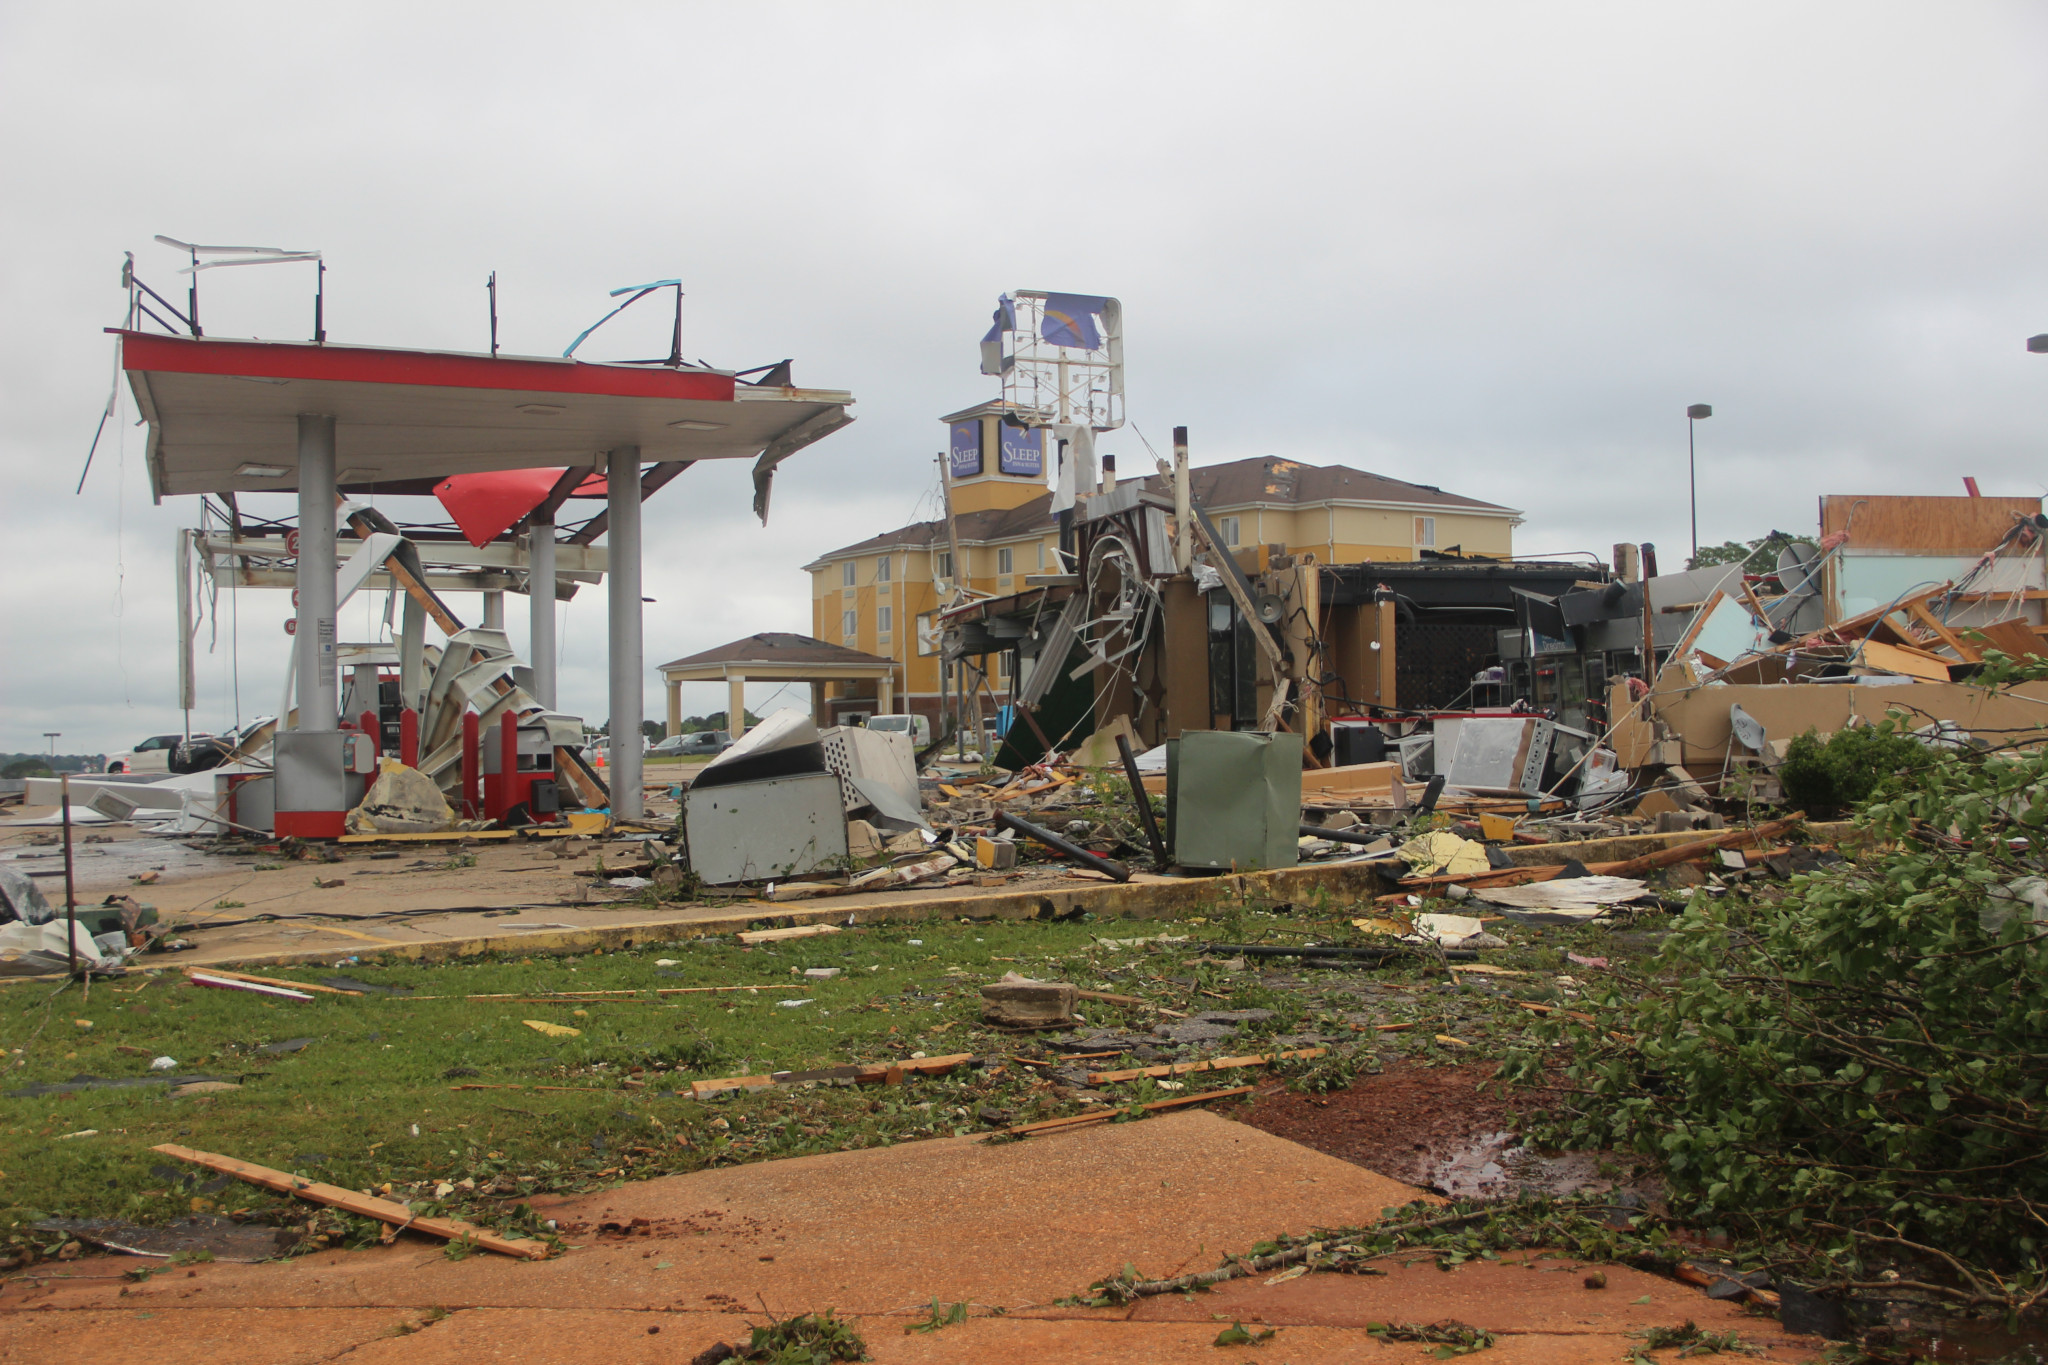 What was left of the Pow-Wow gas station and convenience store on the I-20 service road after the tornado.